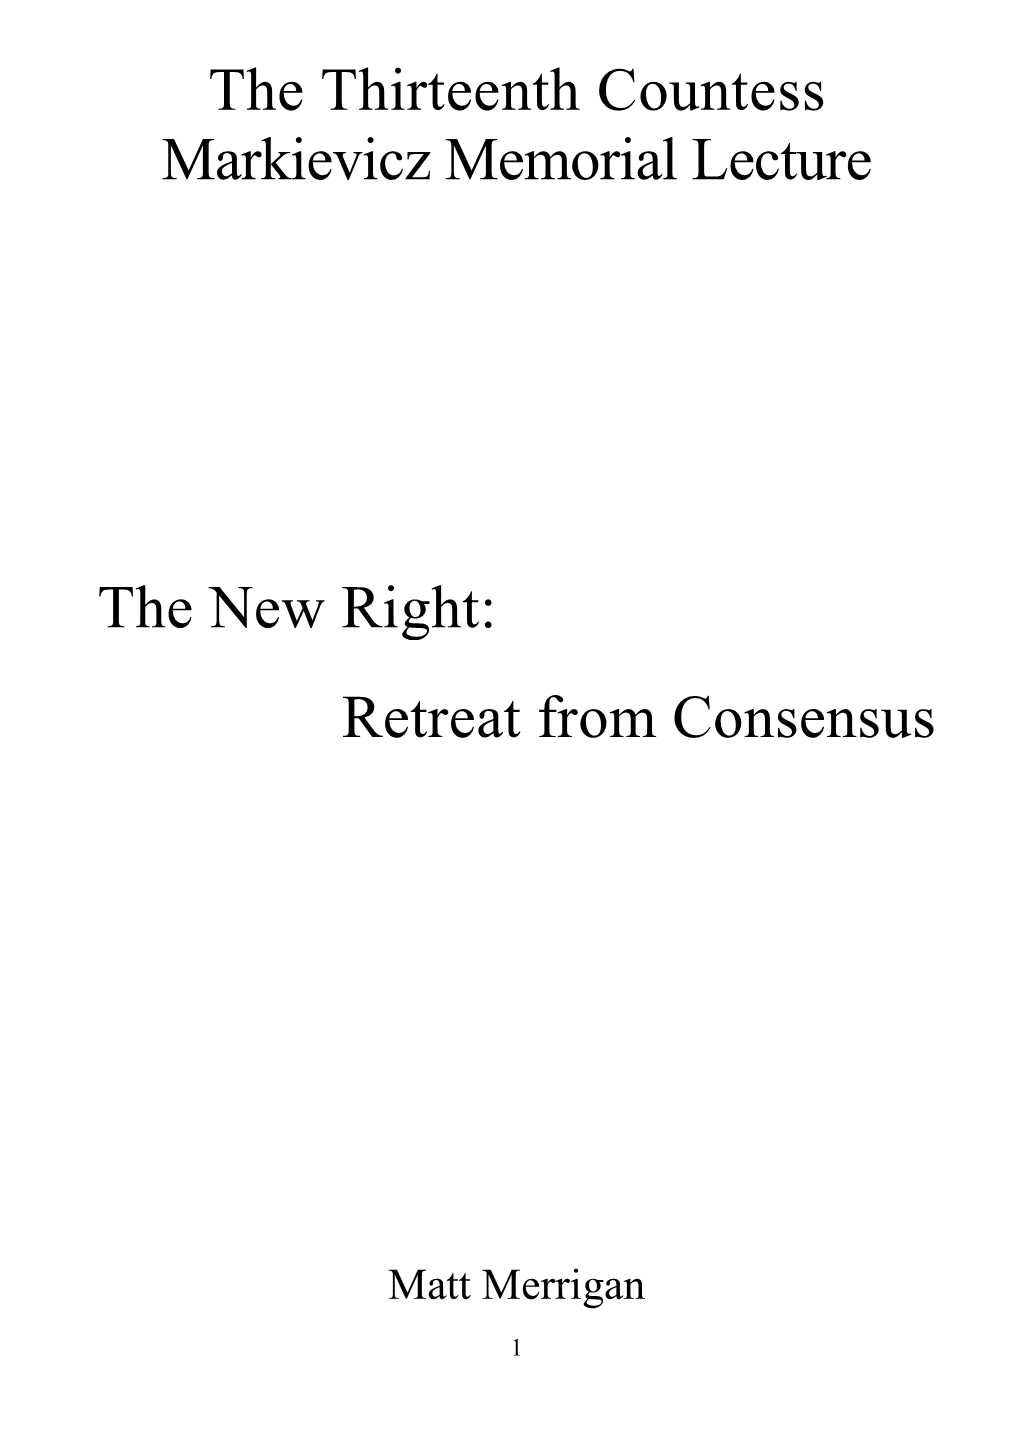 The Thirteenth Countess Markievicz Memorial Lecture the New Right: Retreat from Consensus